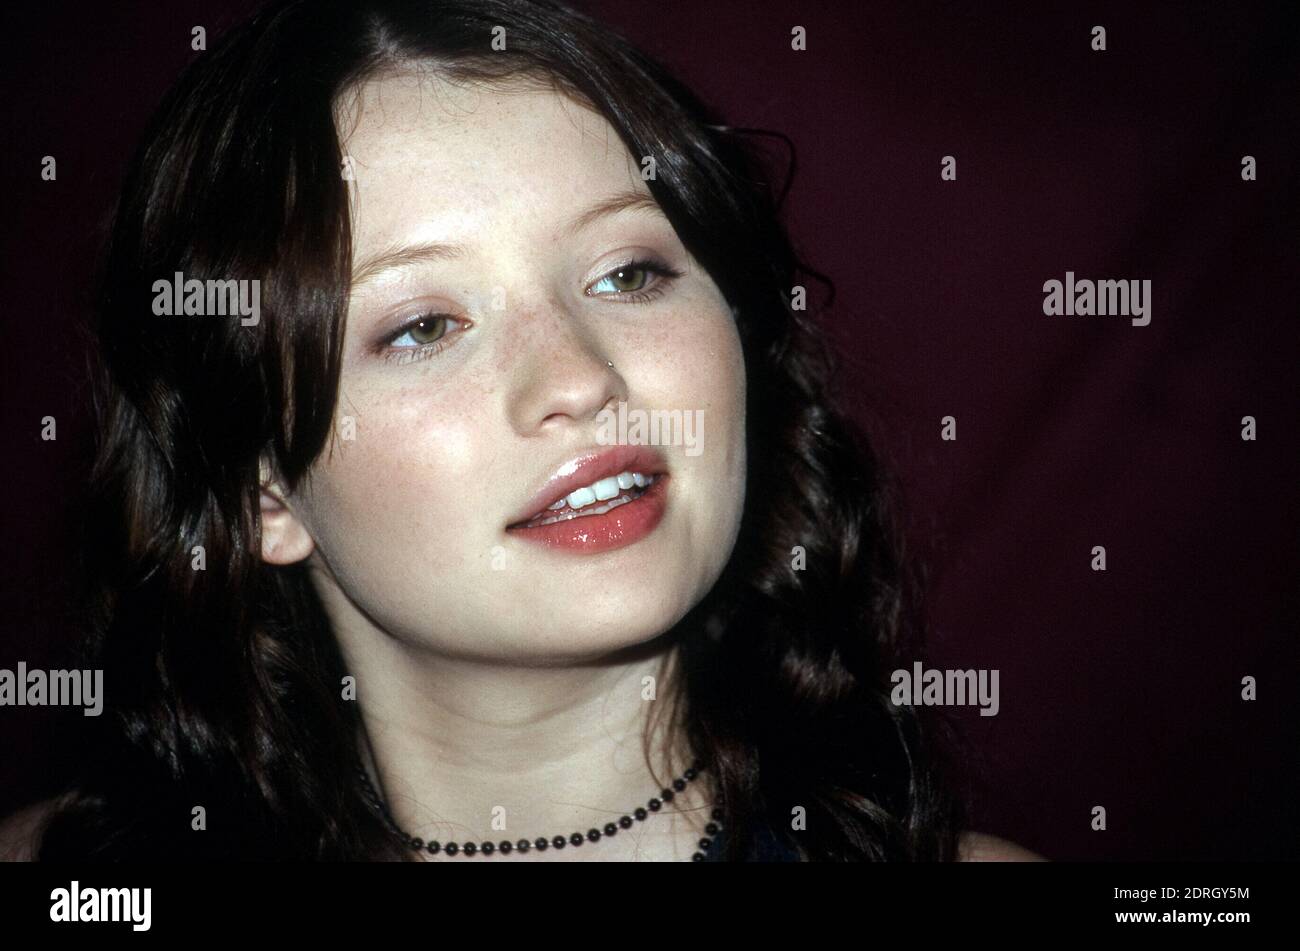 Star of 'Lemony Snicket's A Series of Unfortunate Events,' Emily Browning, circa 2004 / File Reference # 34000-1537PLTHA Stock Photo